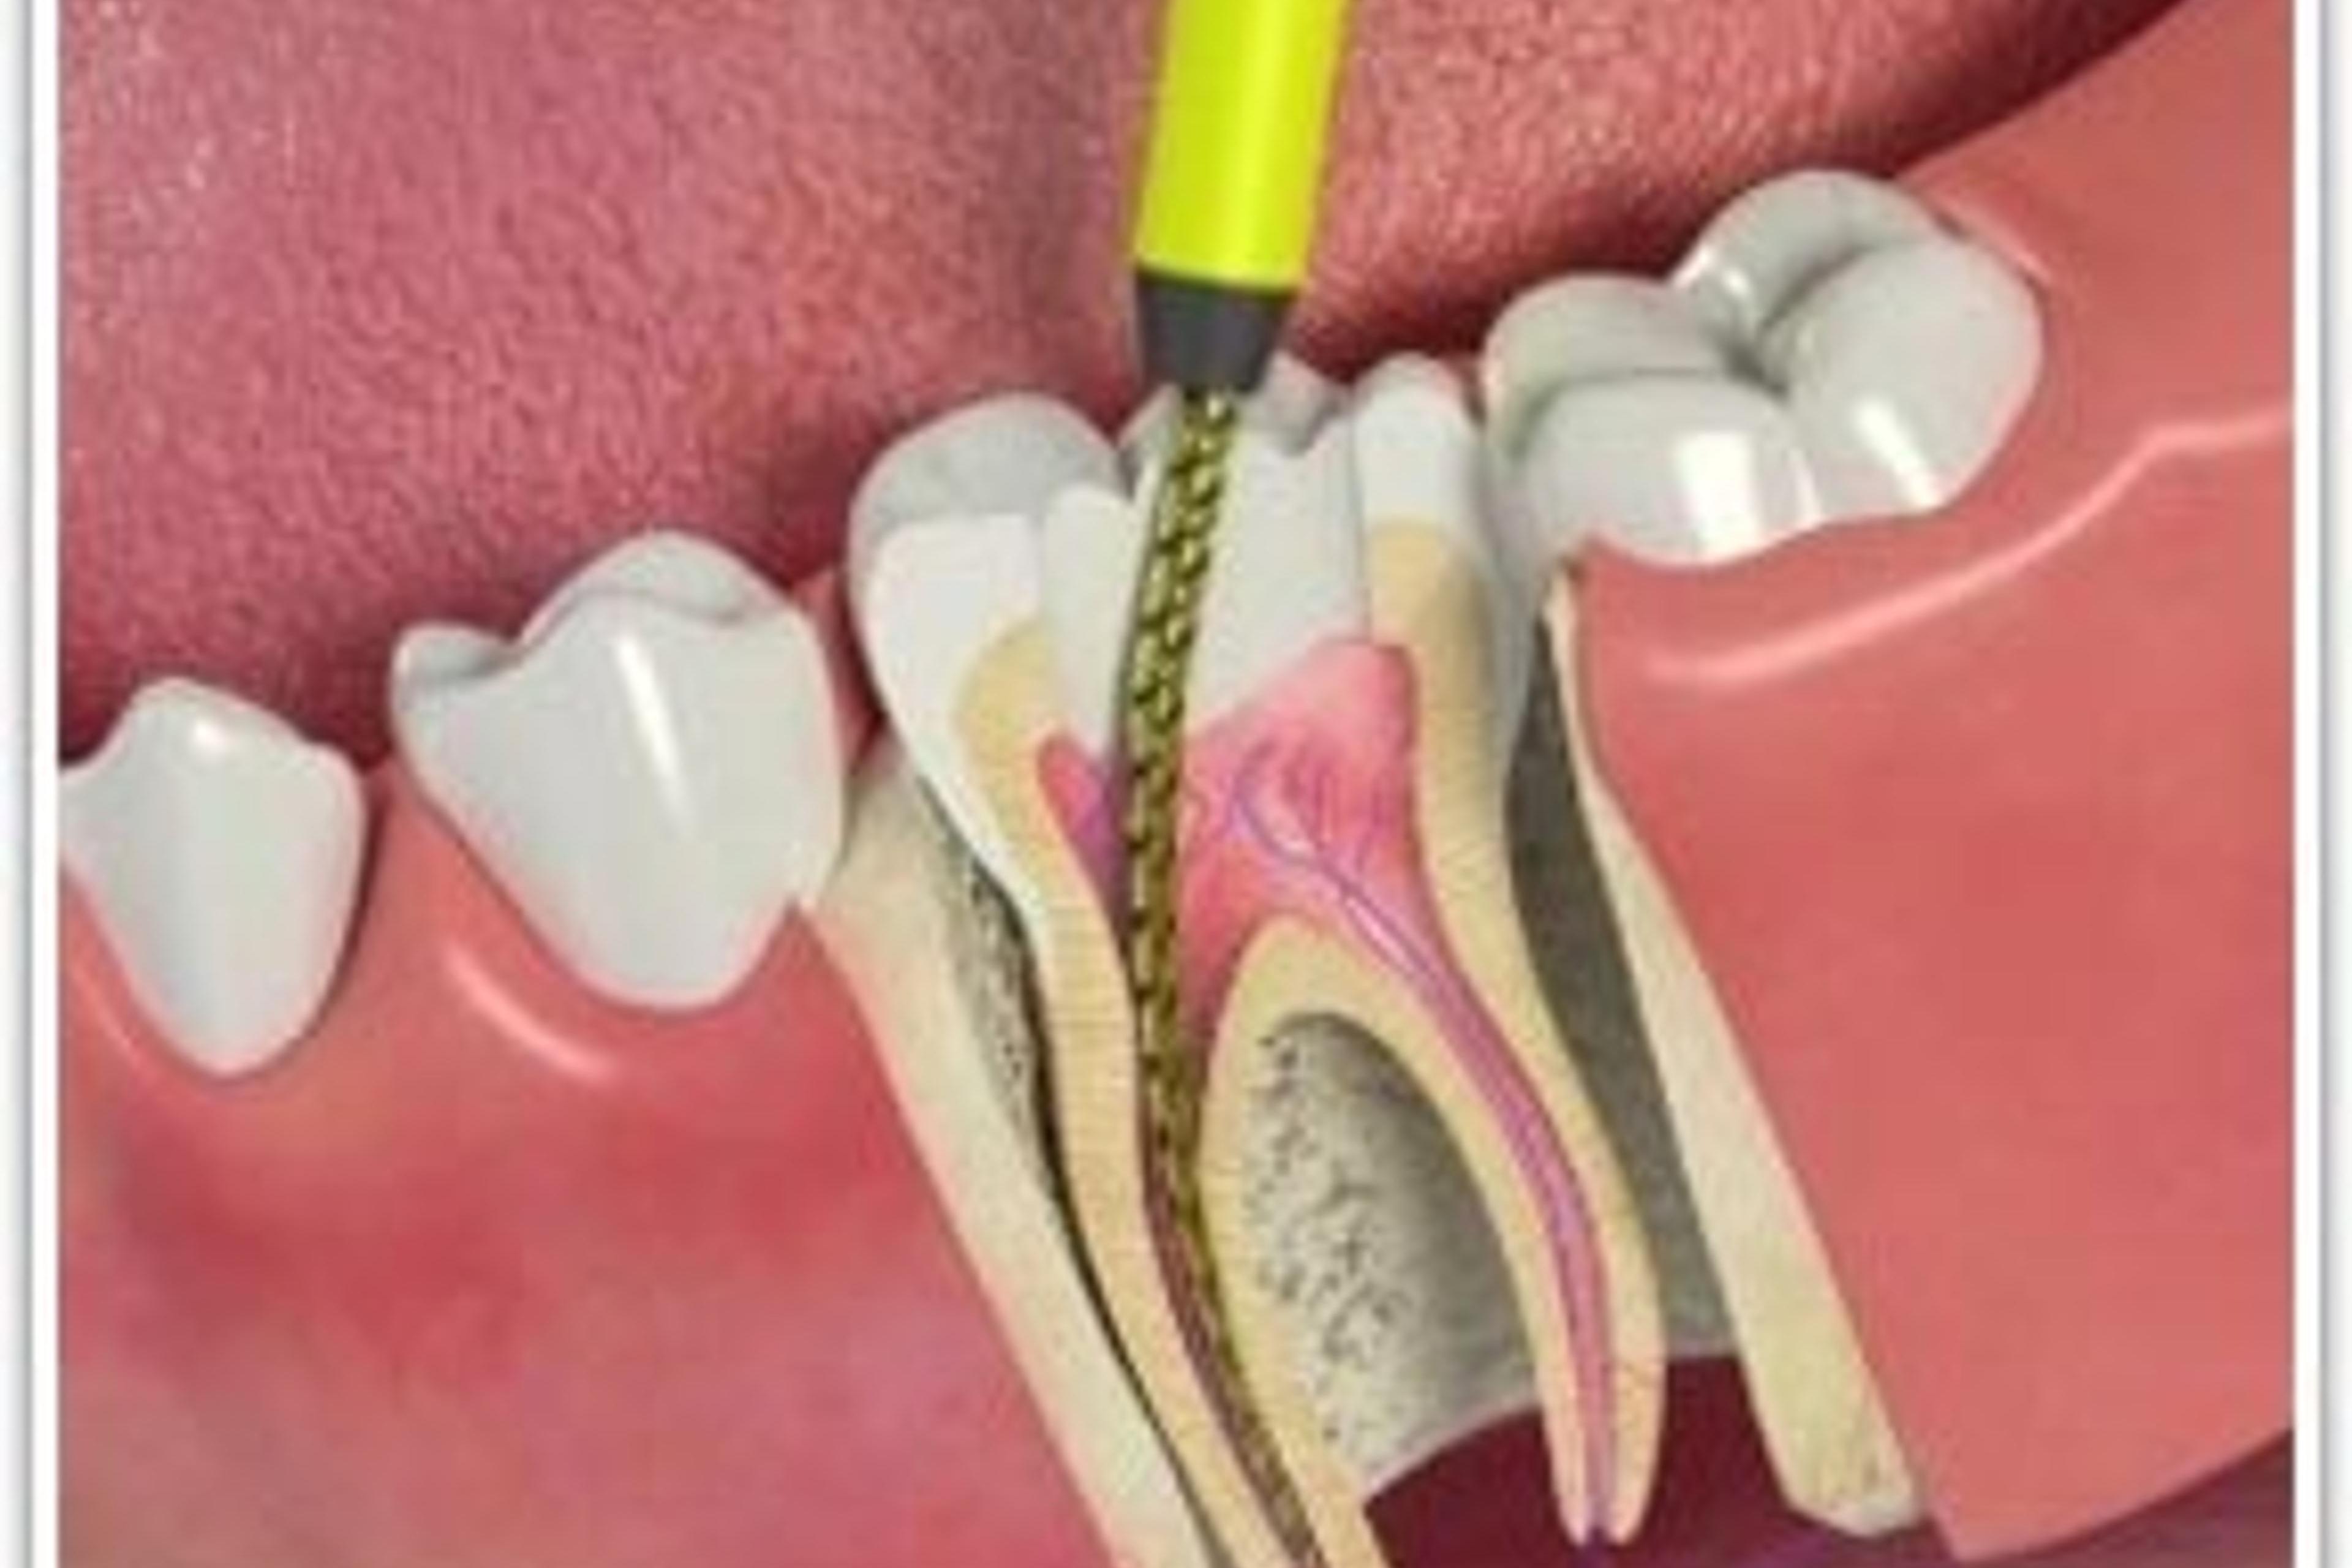 Preparation of root canals